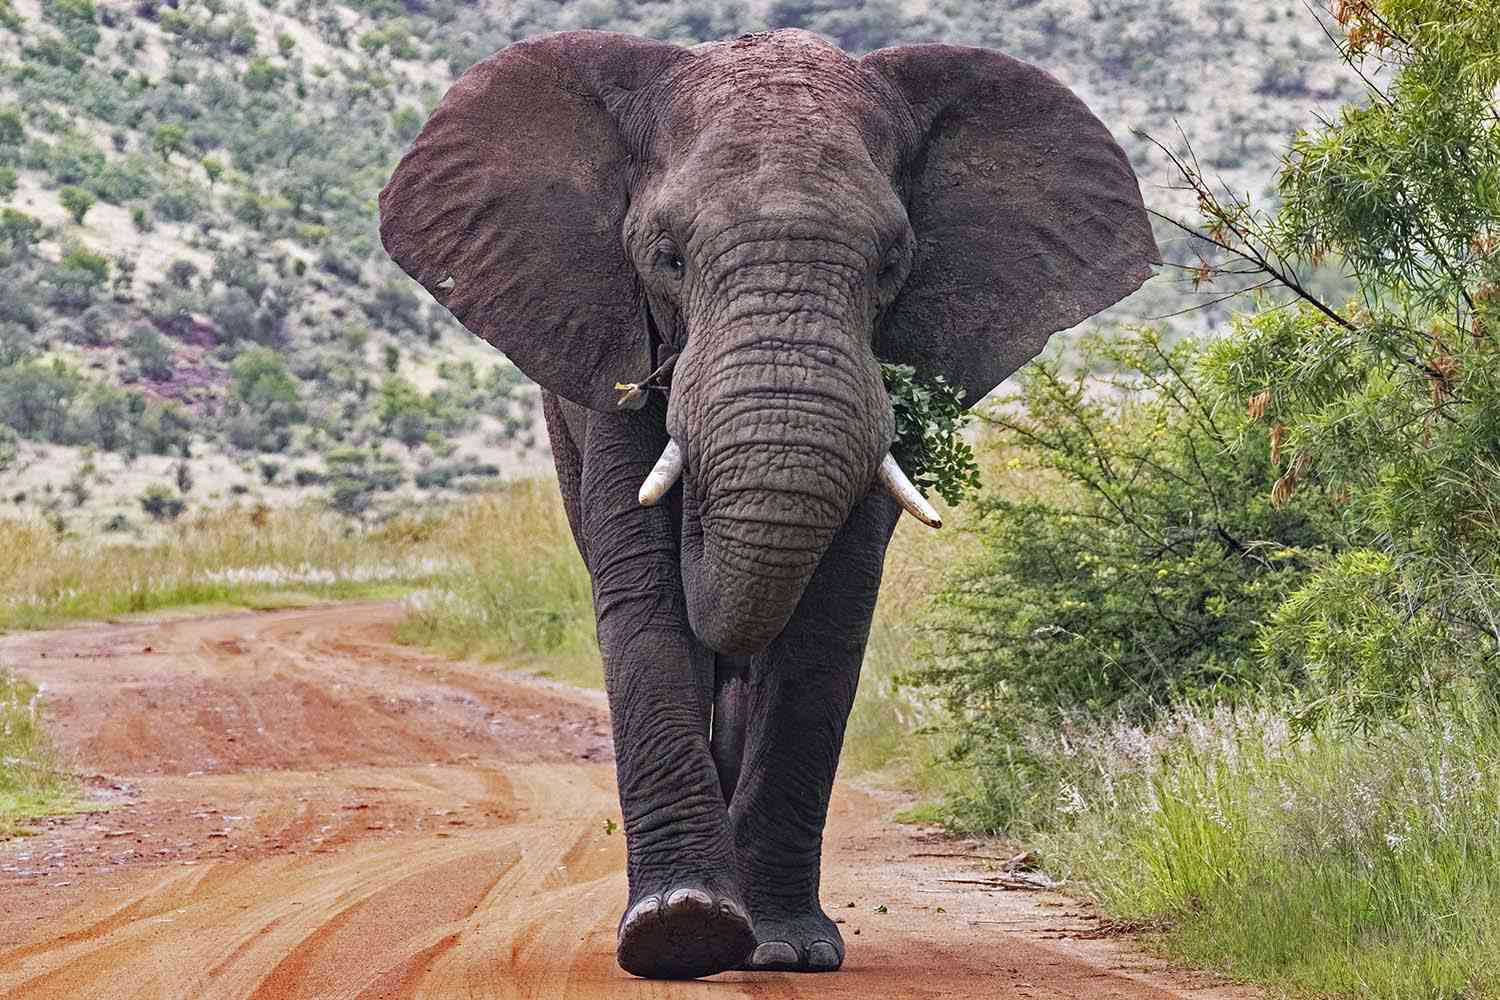 Tourist Trampled to Death by Elephant in South Africa While Taking Photos at National Park